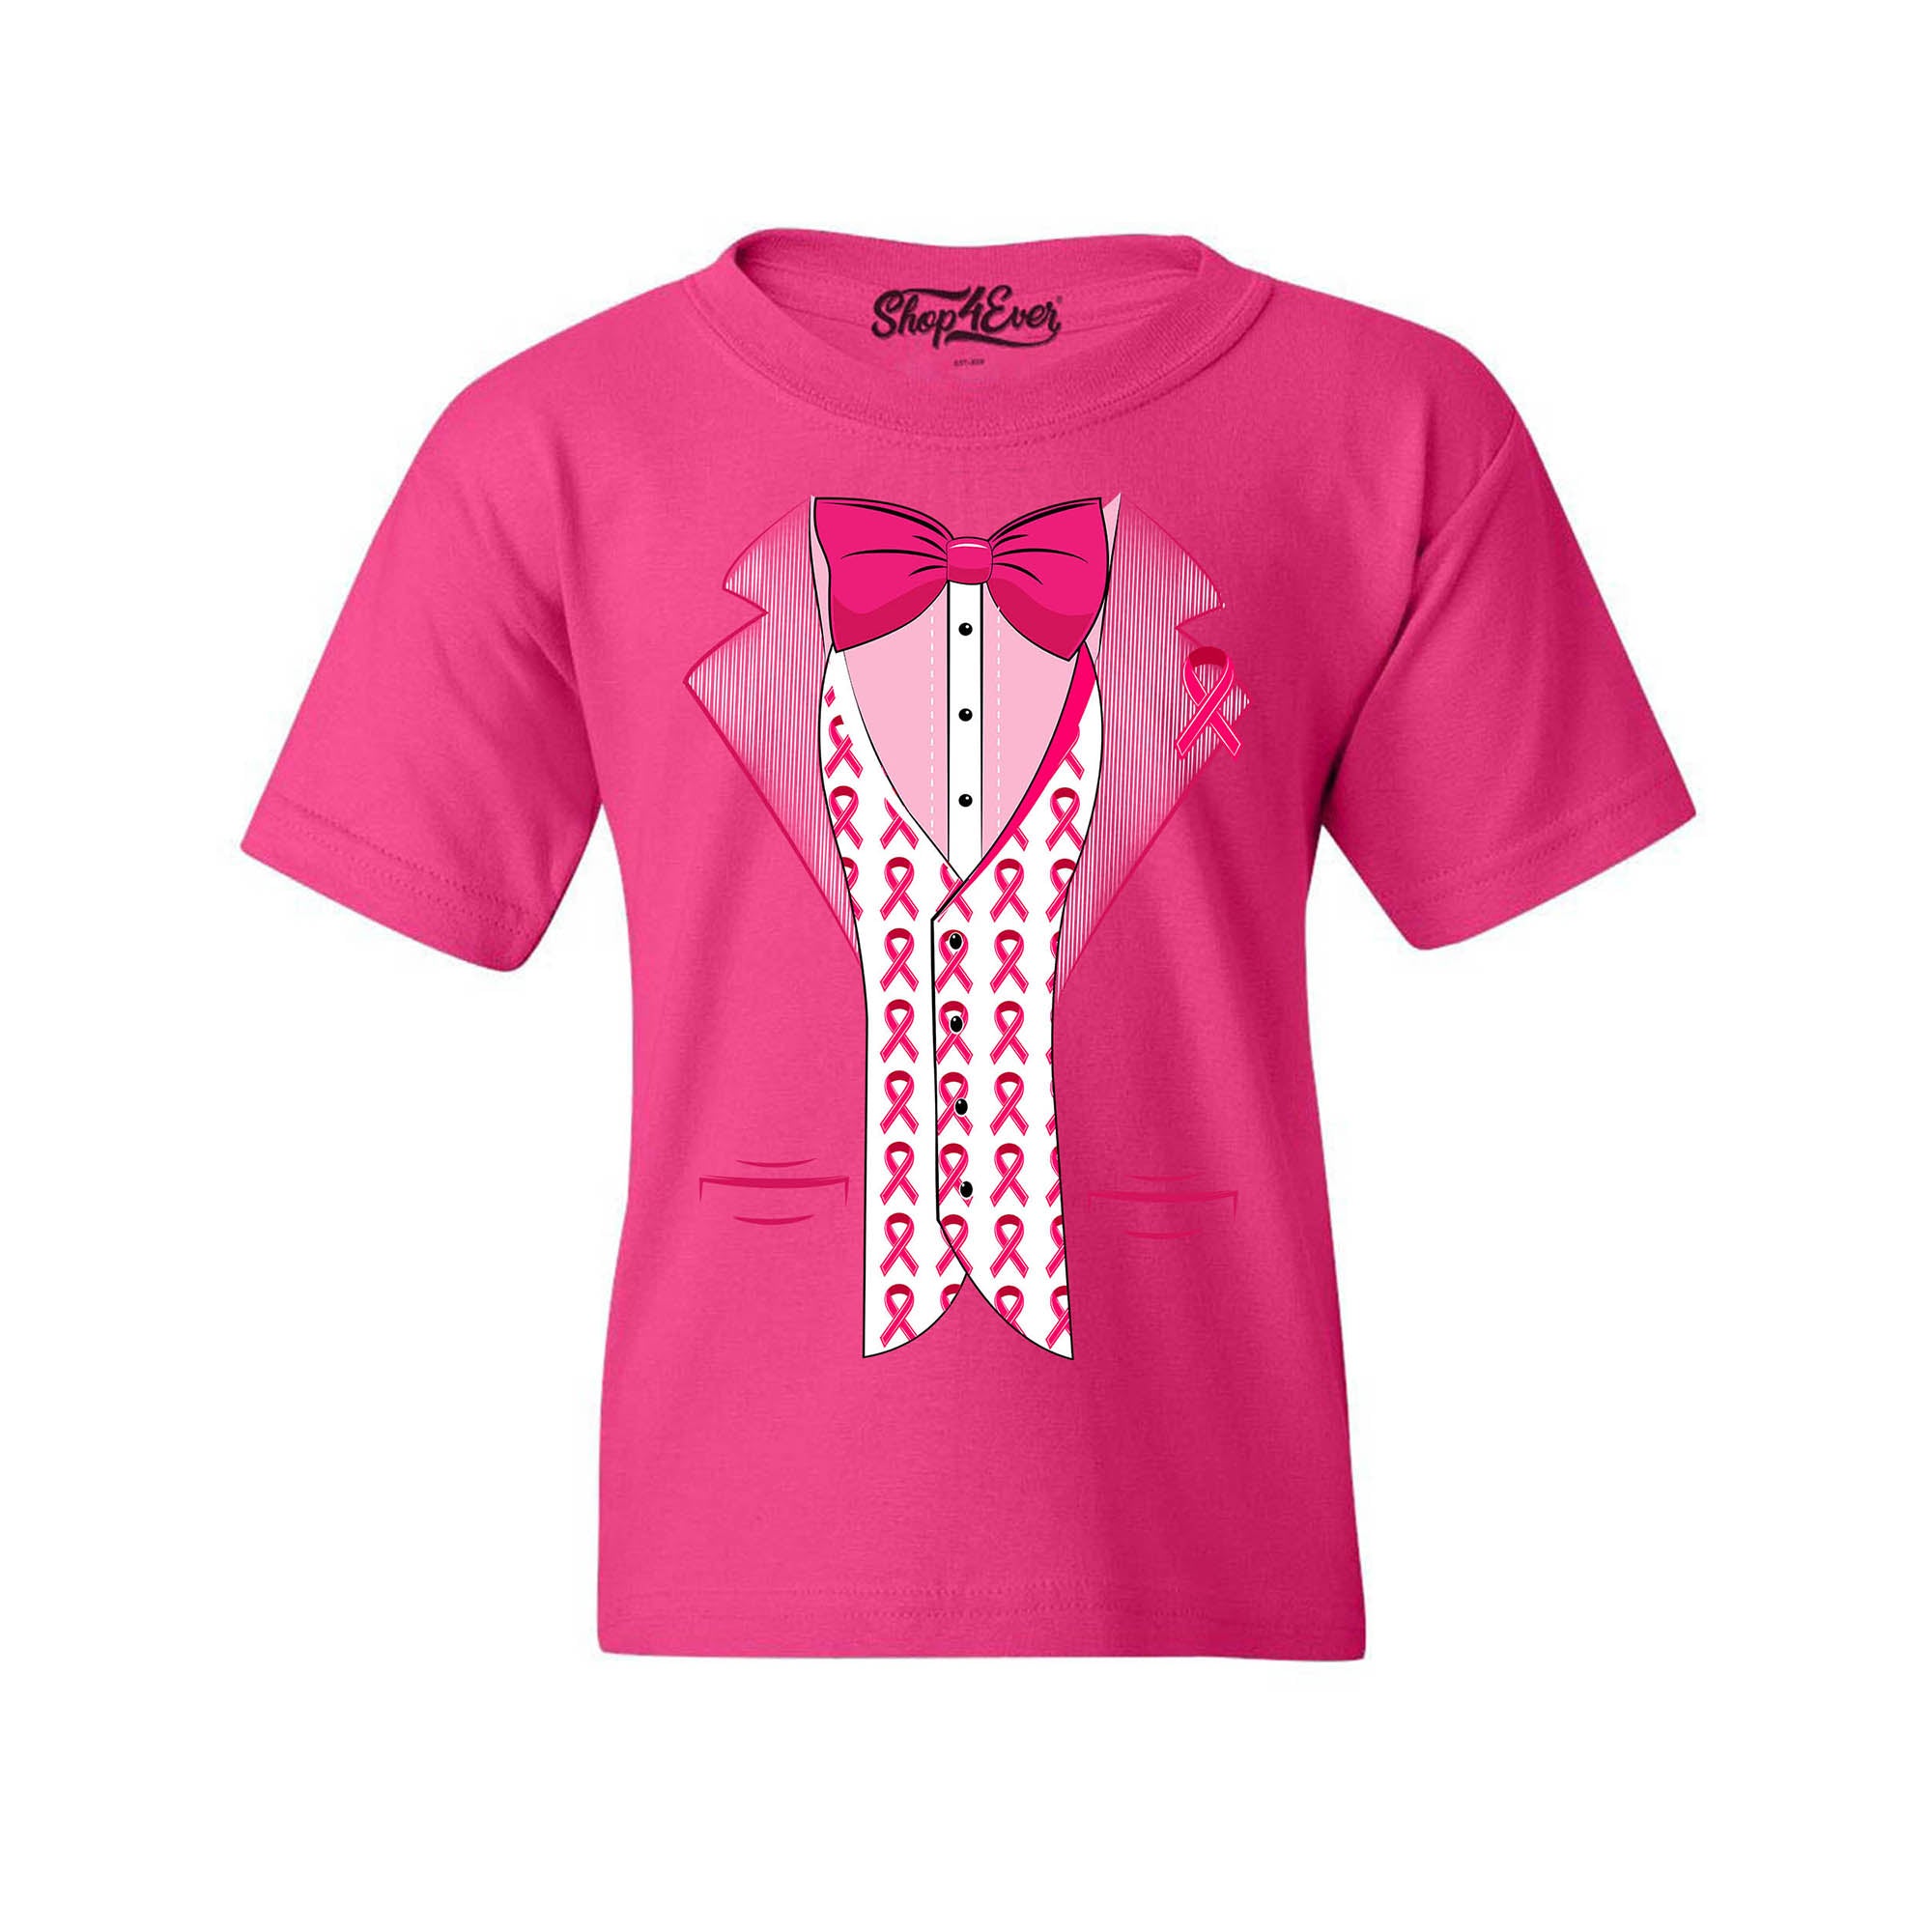 Breast Cancer Tuxedo Youth's T-Shirt Support Awareness Child's Tee